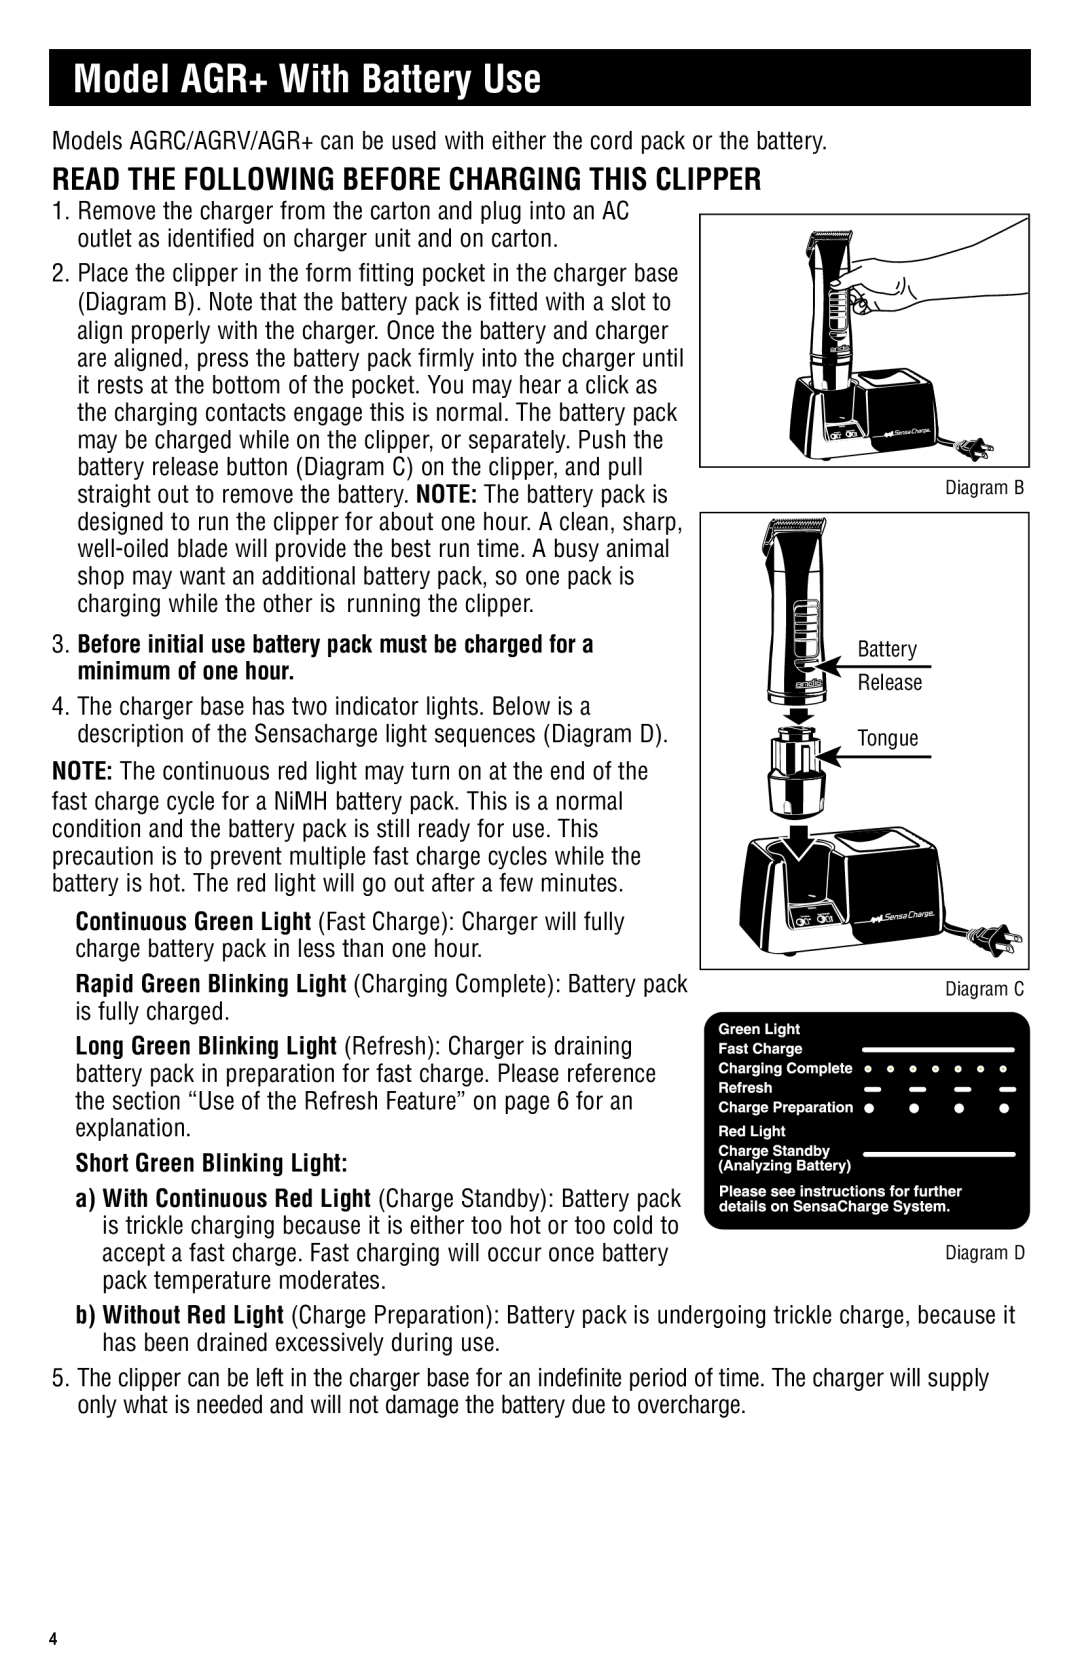 Andis Company AGRC manual Model AGR+ With Battery Use, Read The Following Before Charging This Clipper 